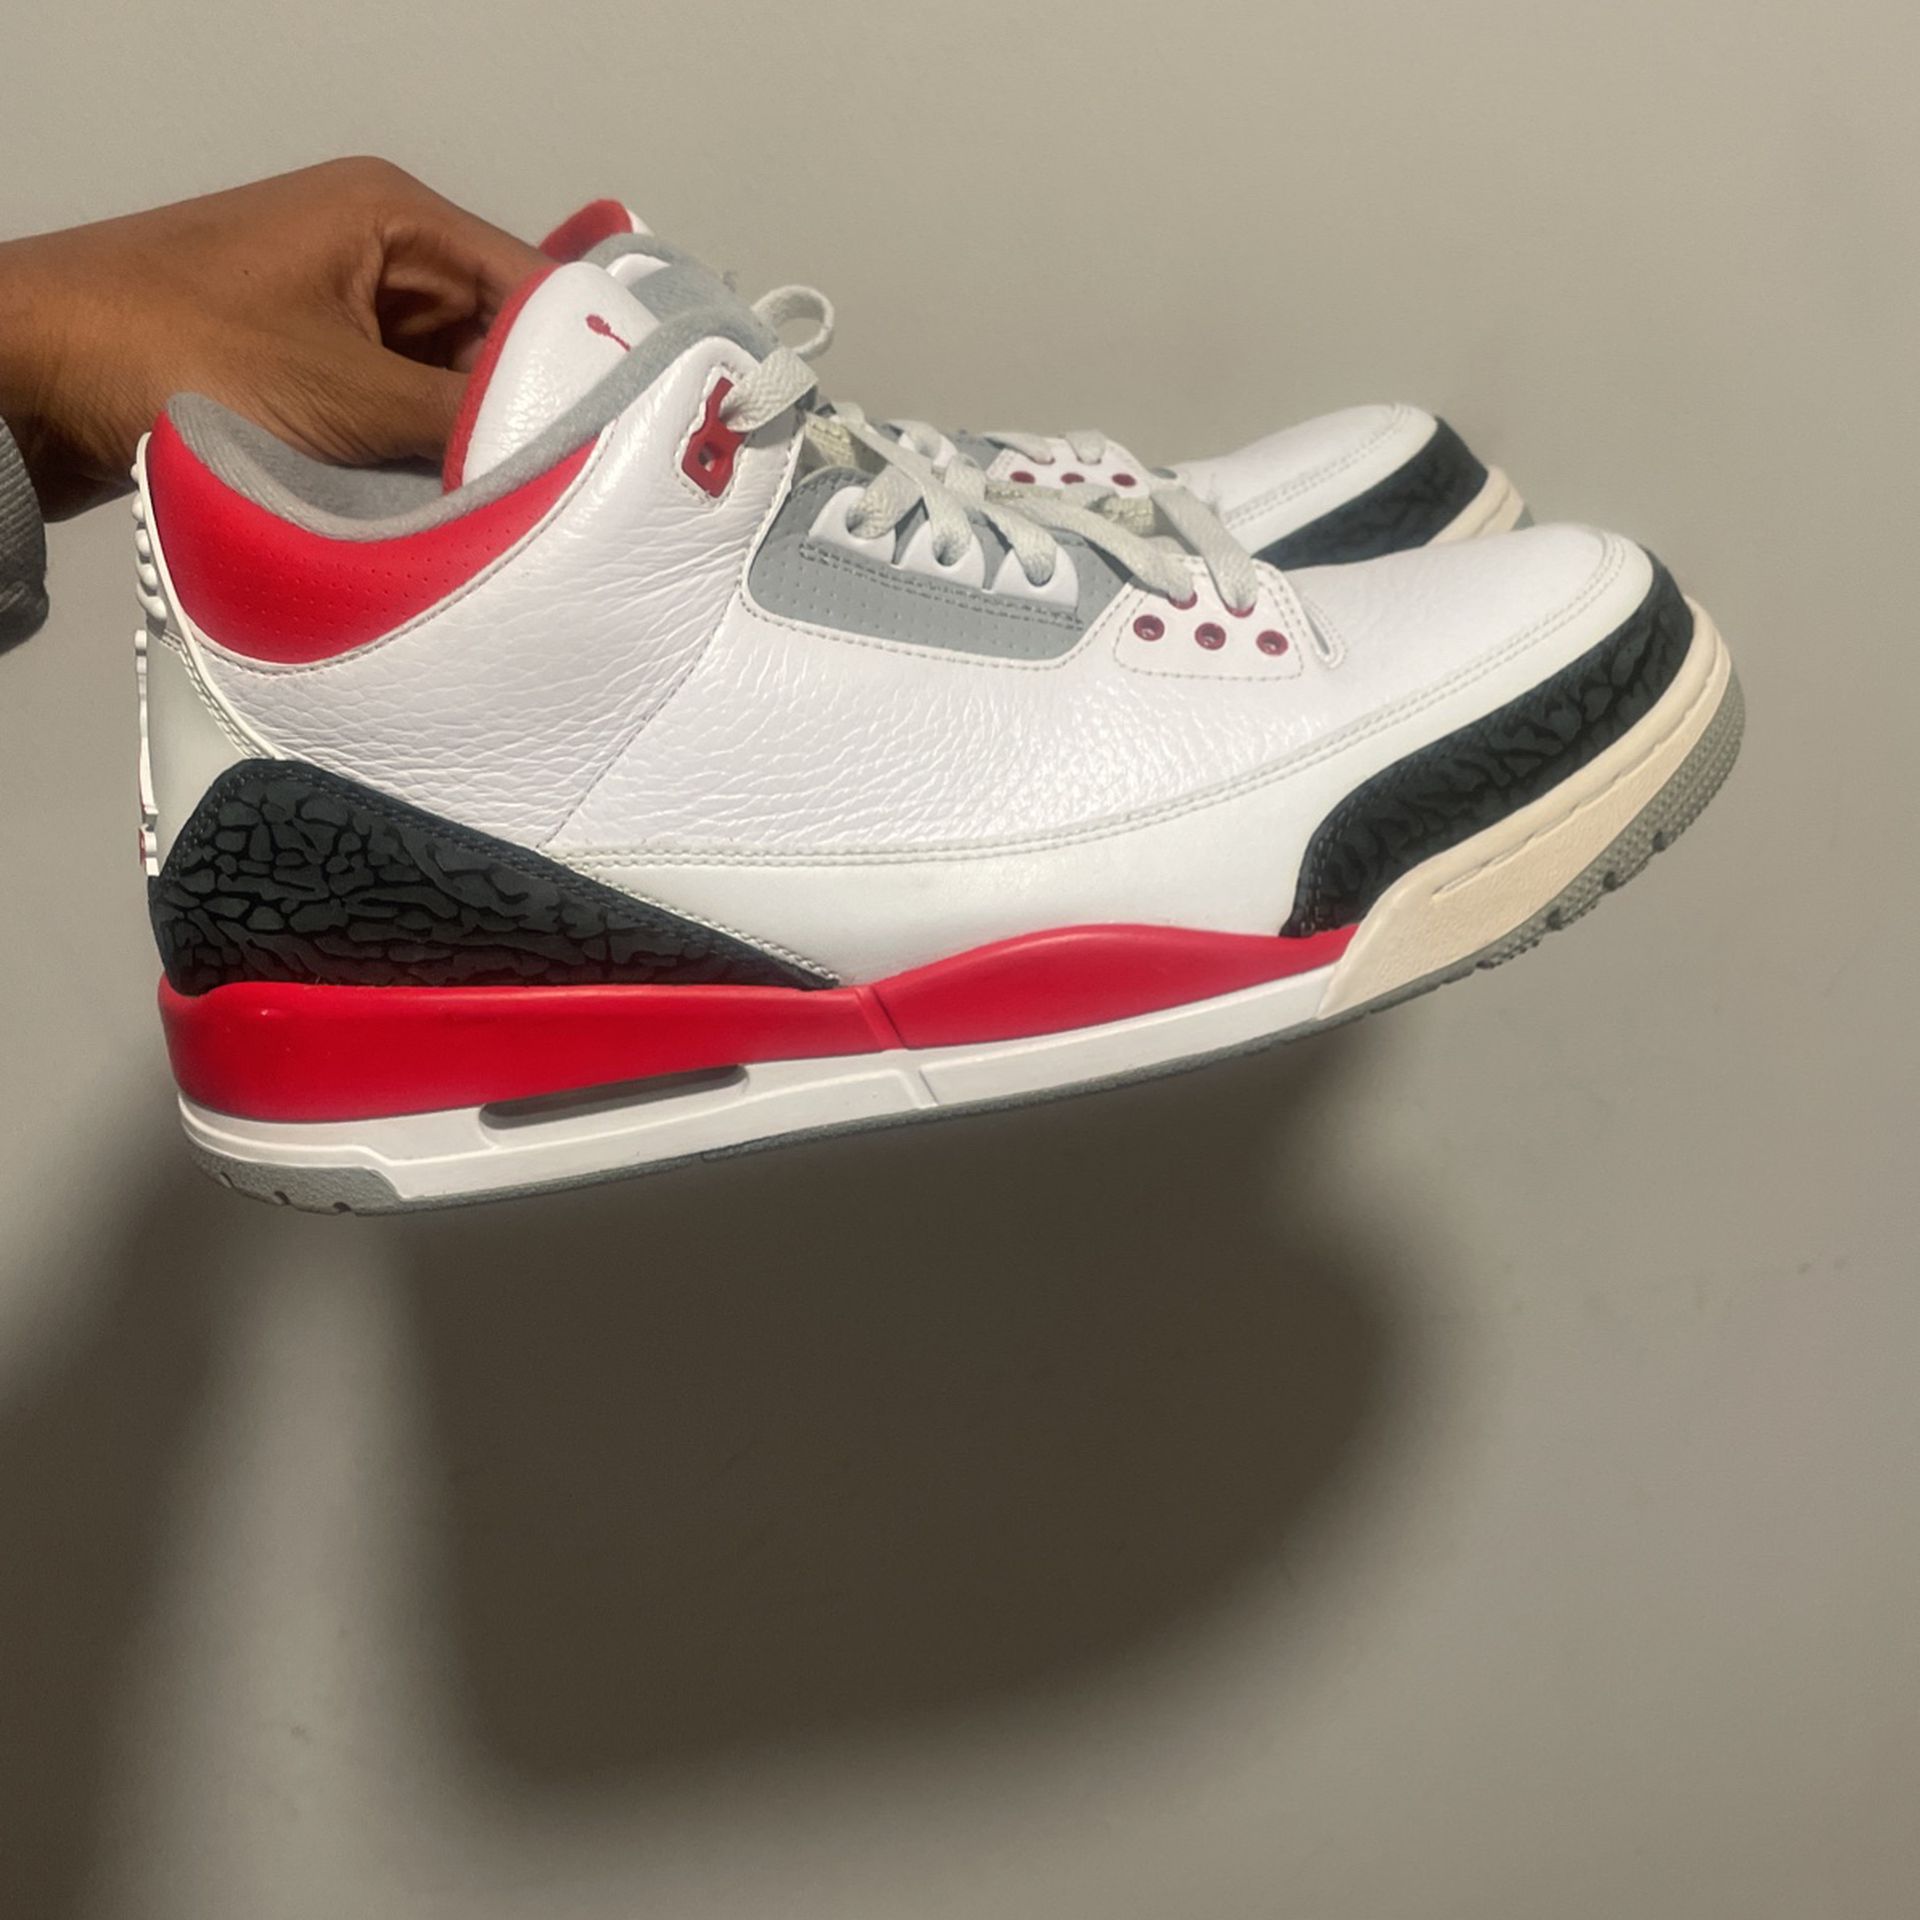 FIRE RED 3s Size 11.5